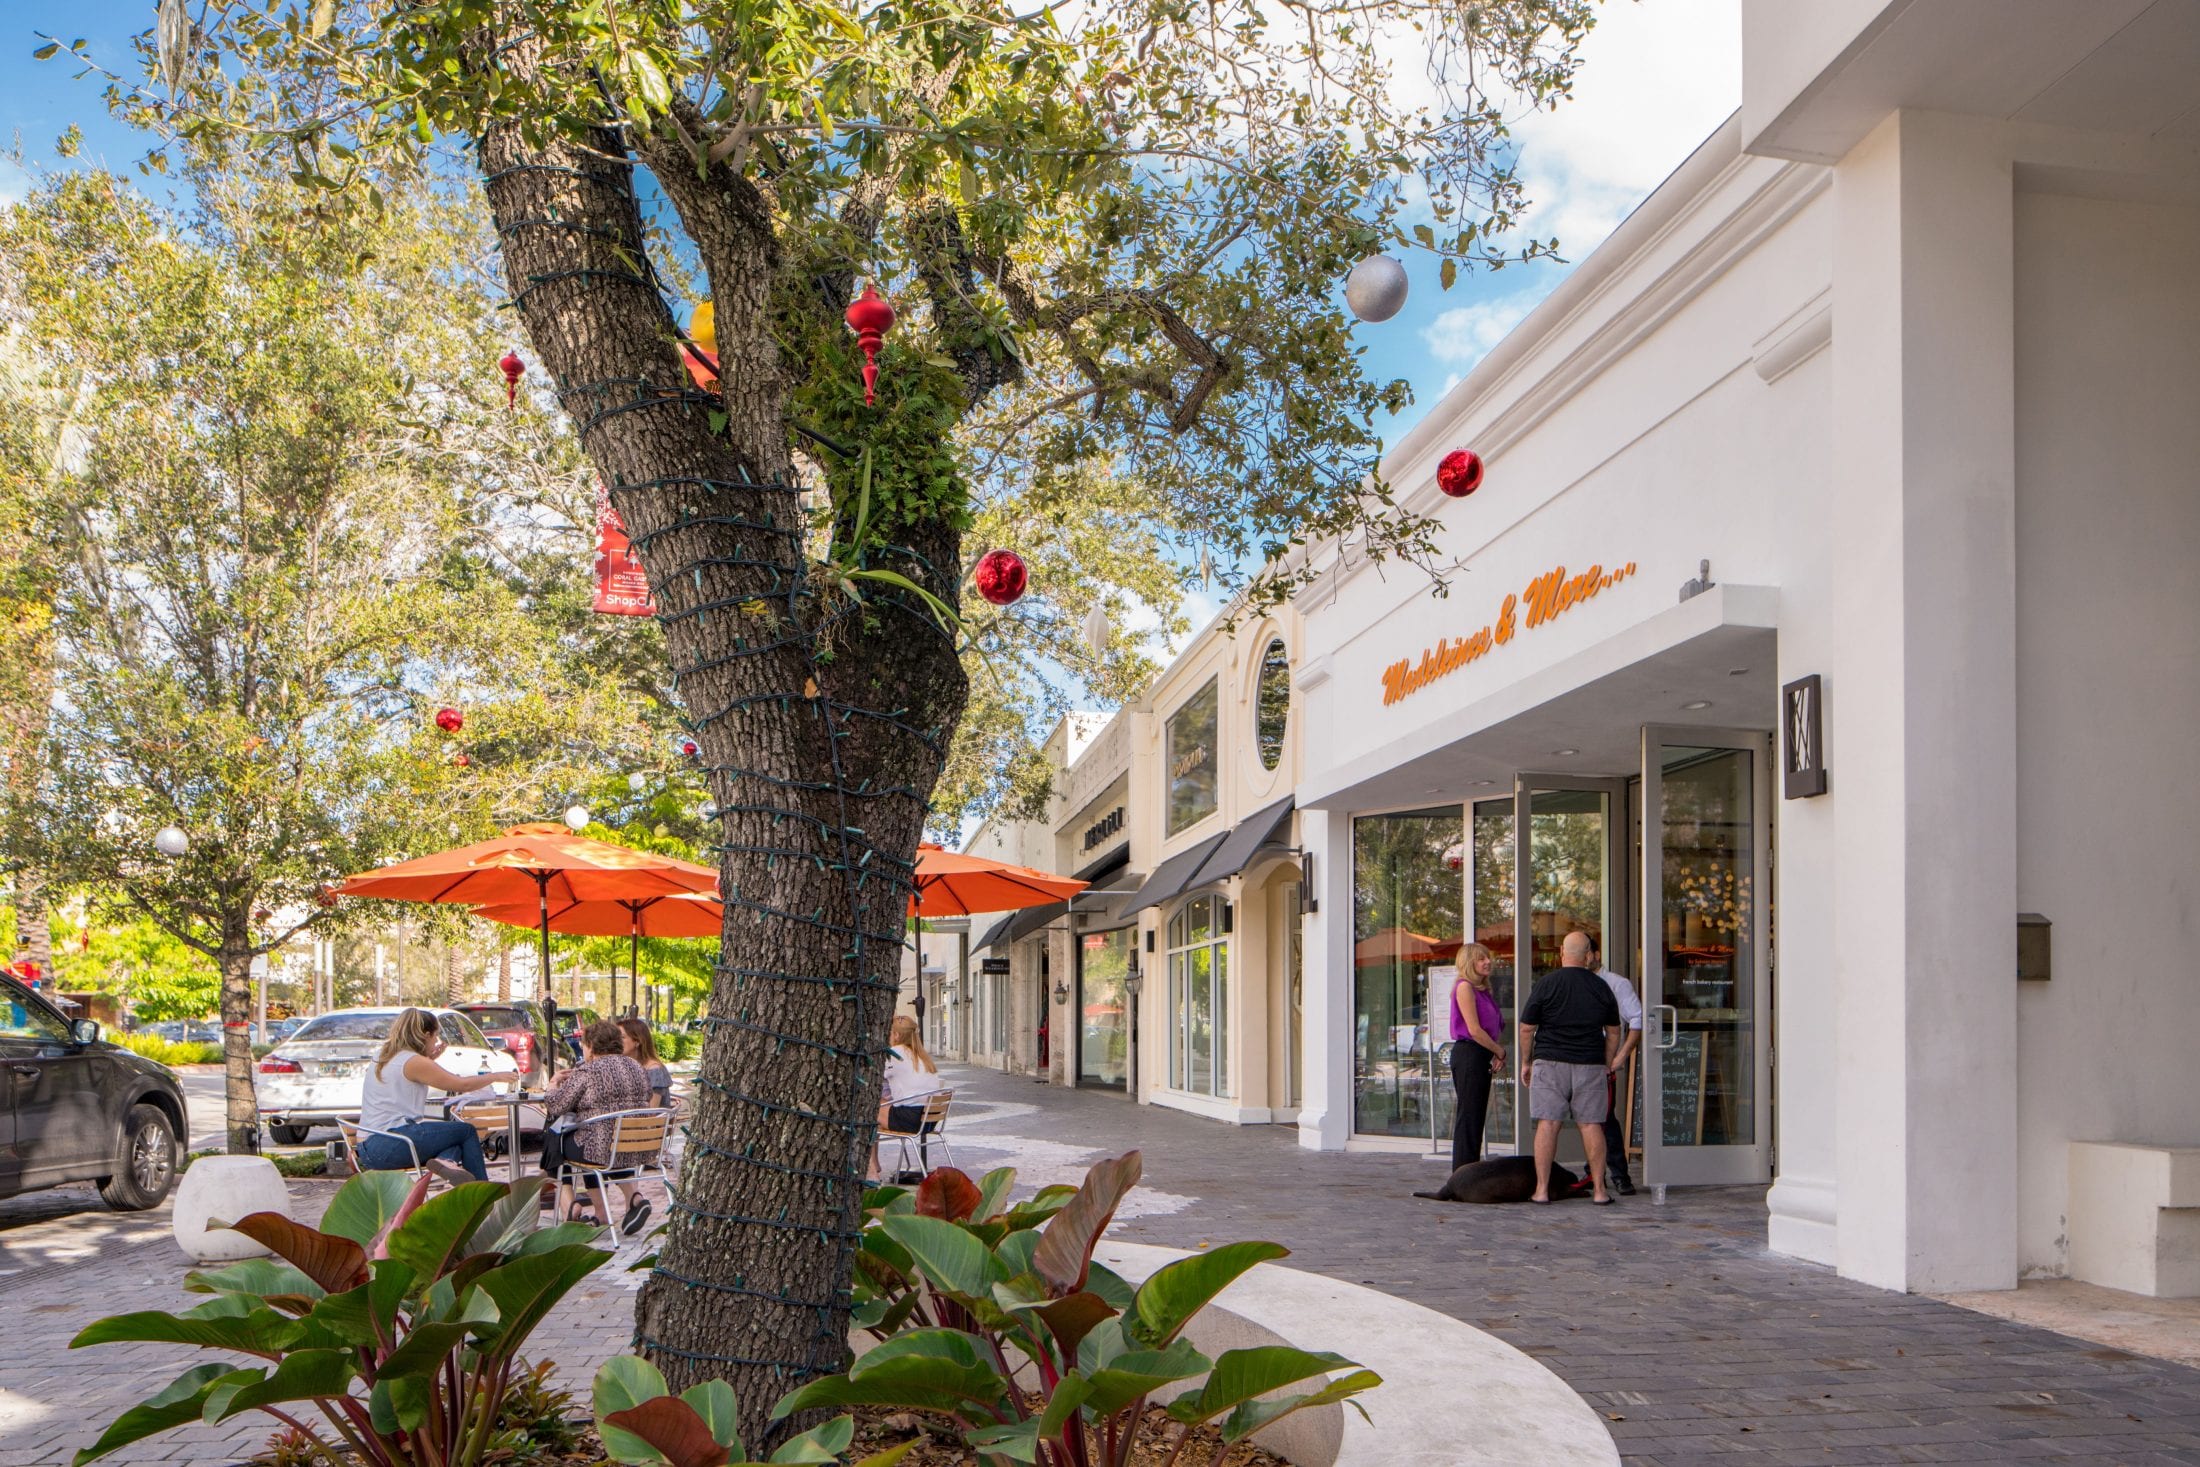 Art, Culture And History in Coral Gables